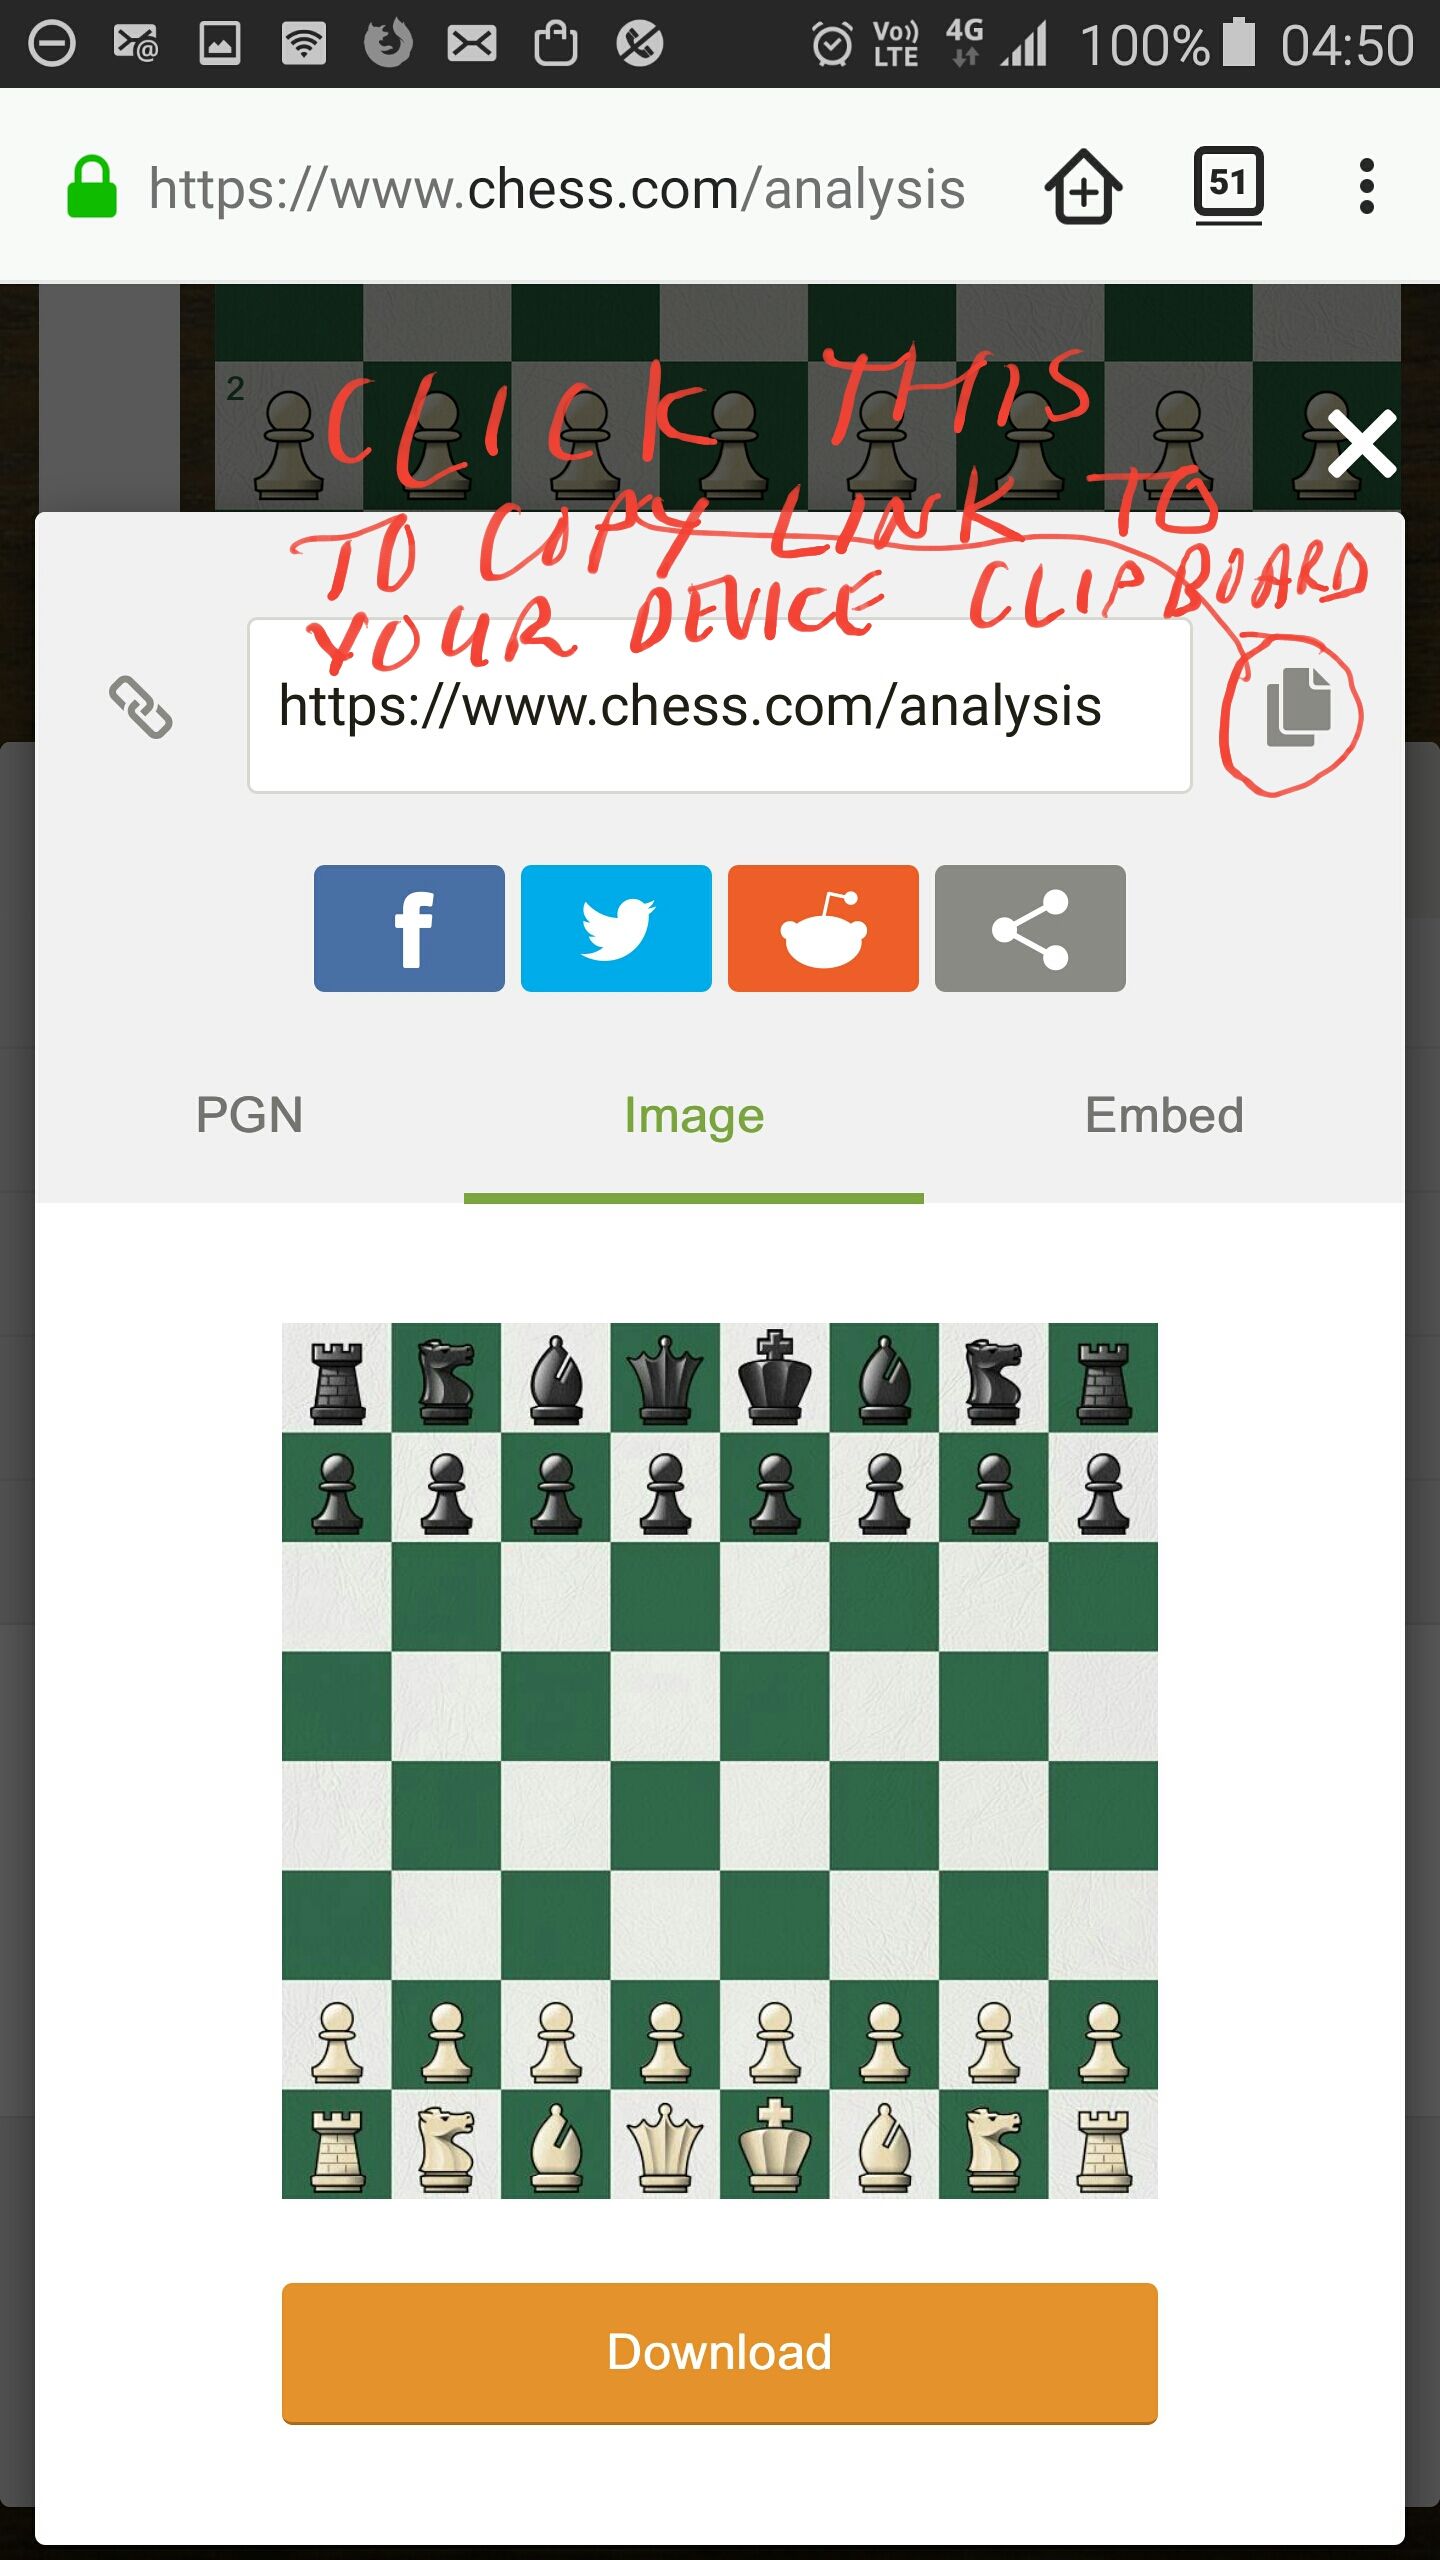 pgn chess analysis for game